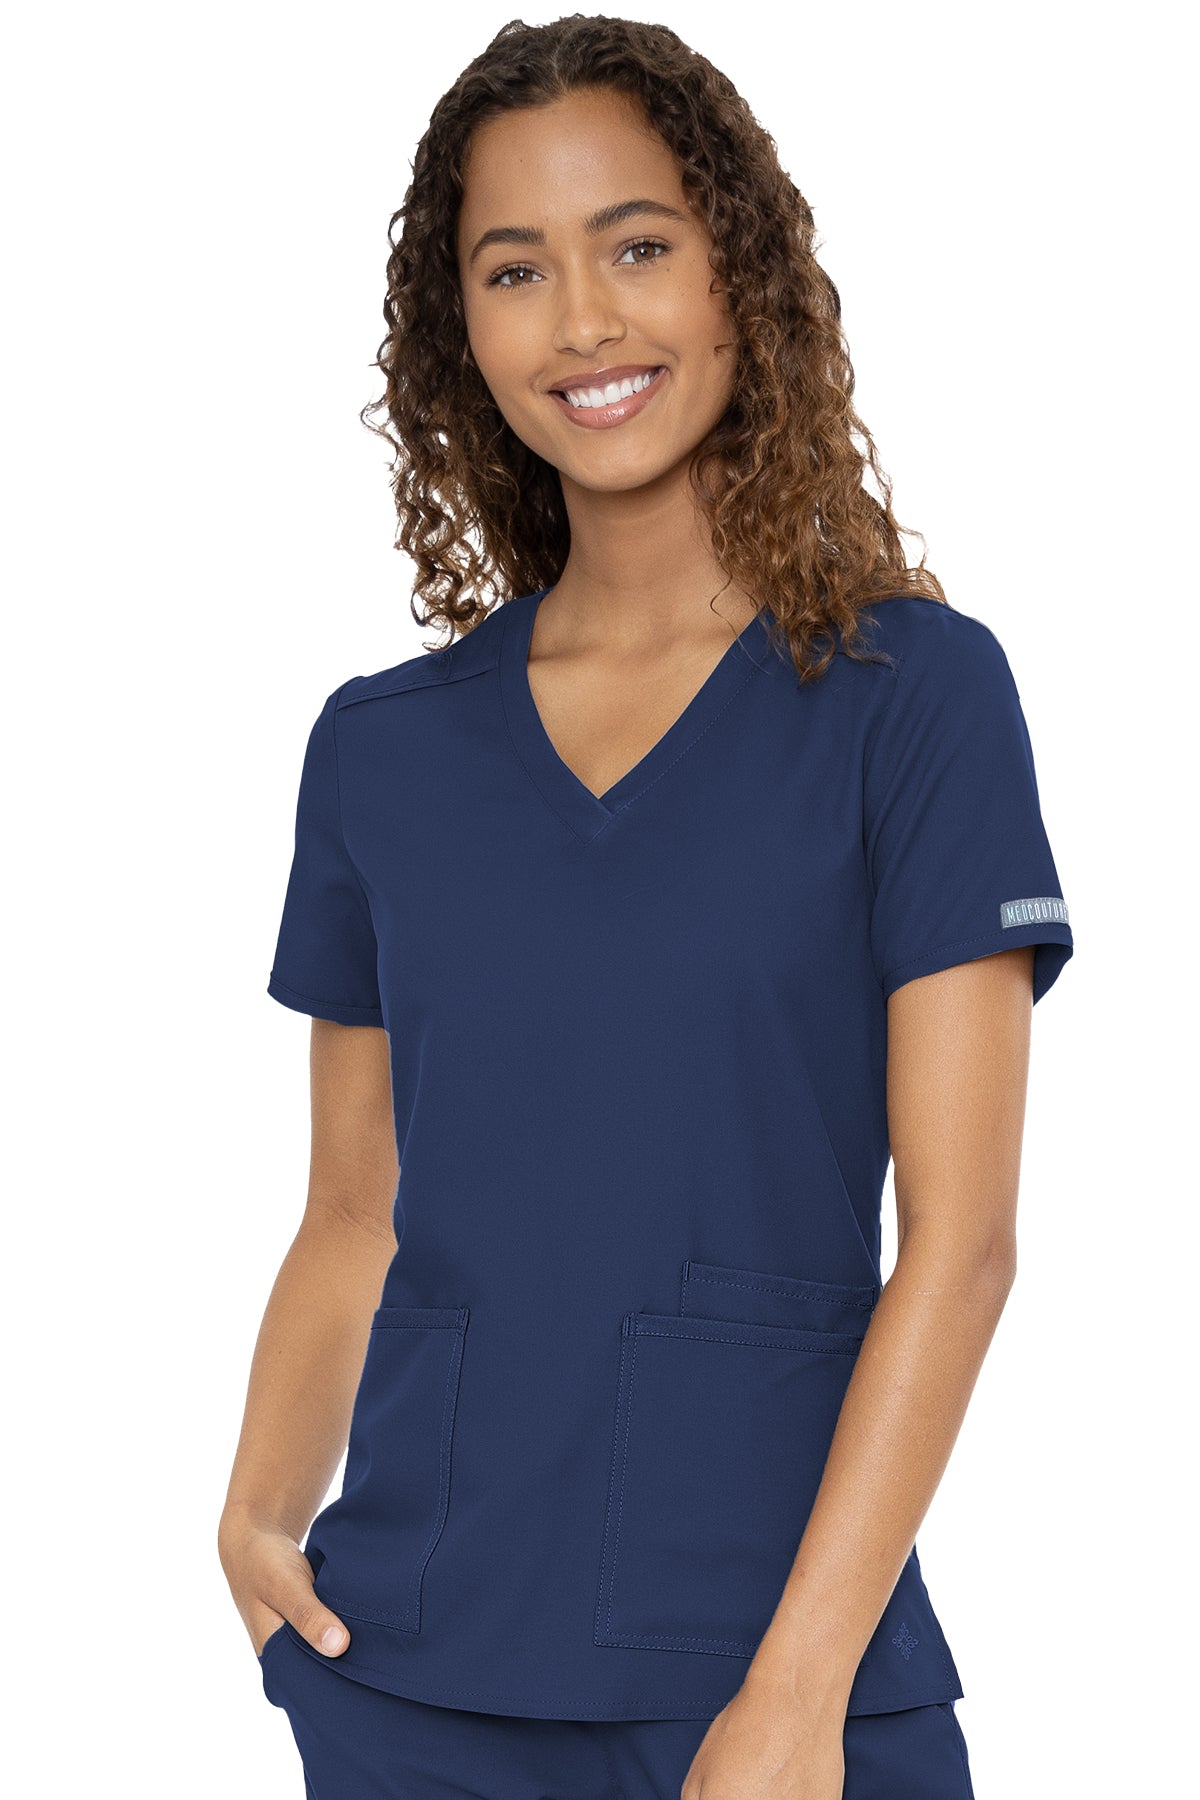 Med Couture Scrub Top Insight Classic V-Neck 3 Pocket in Navy at Parker's Clothing and Shoes.